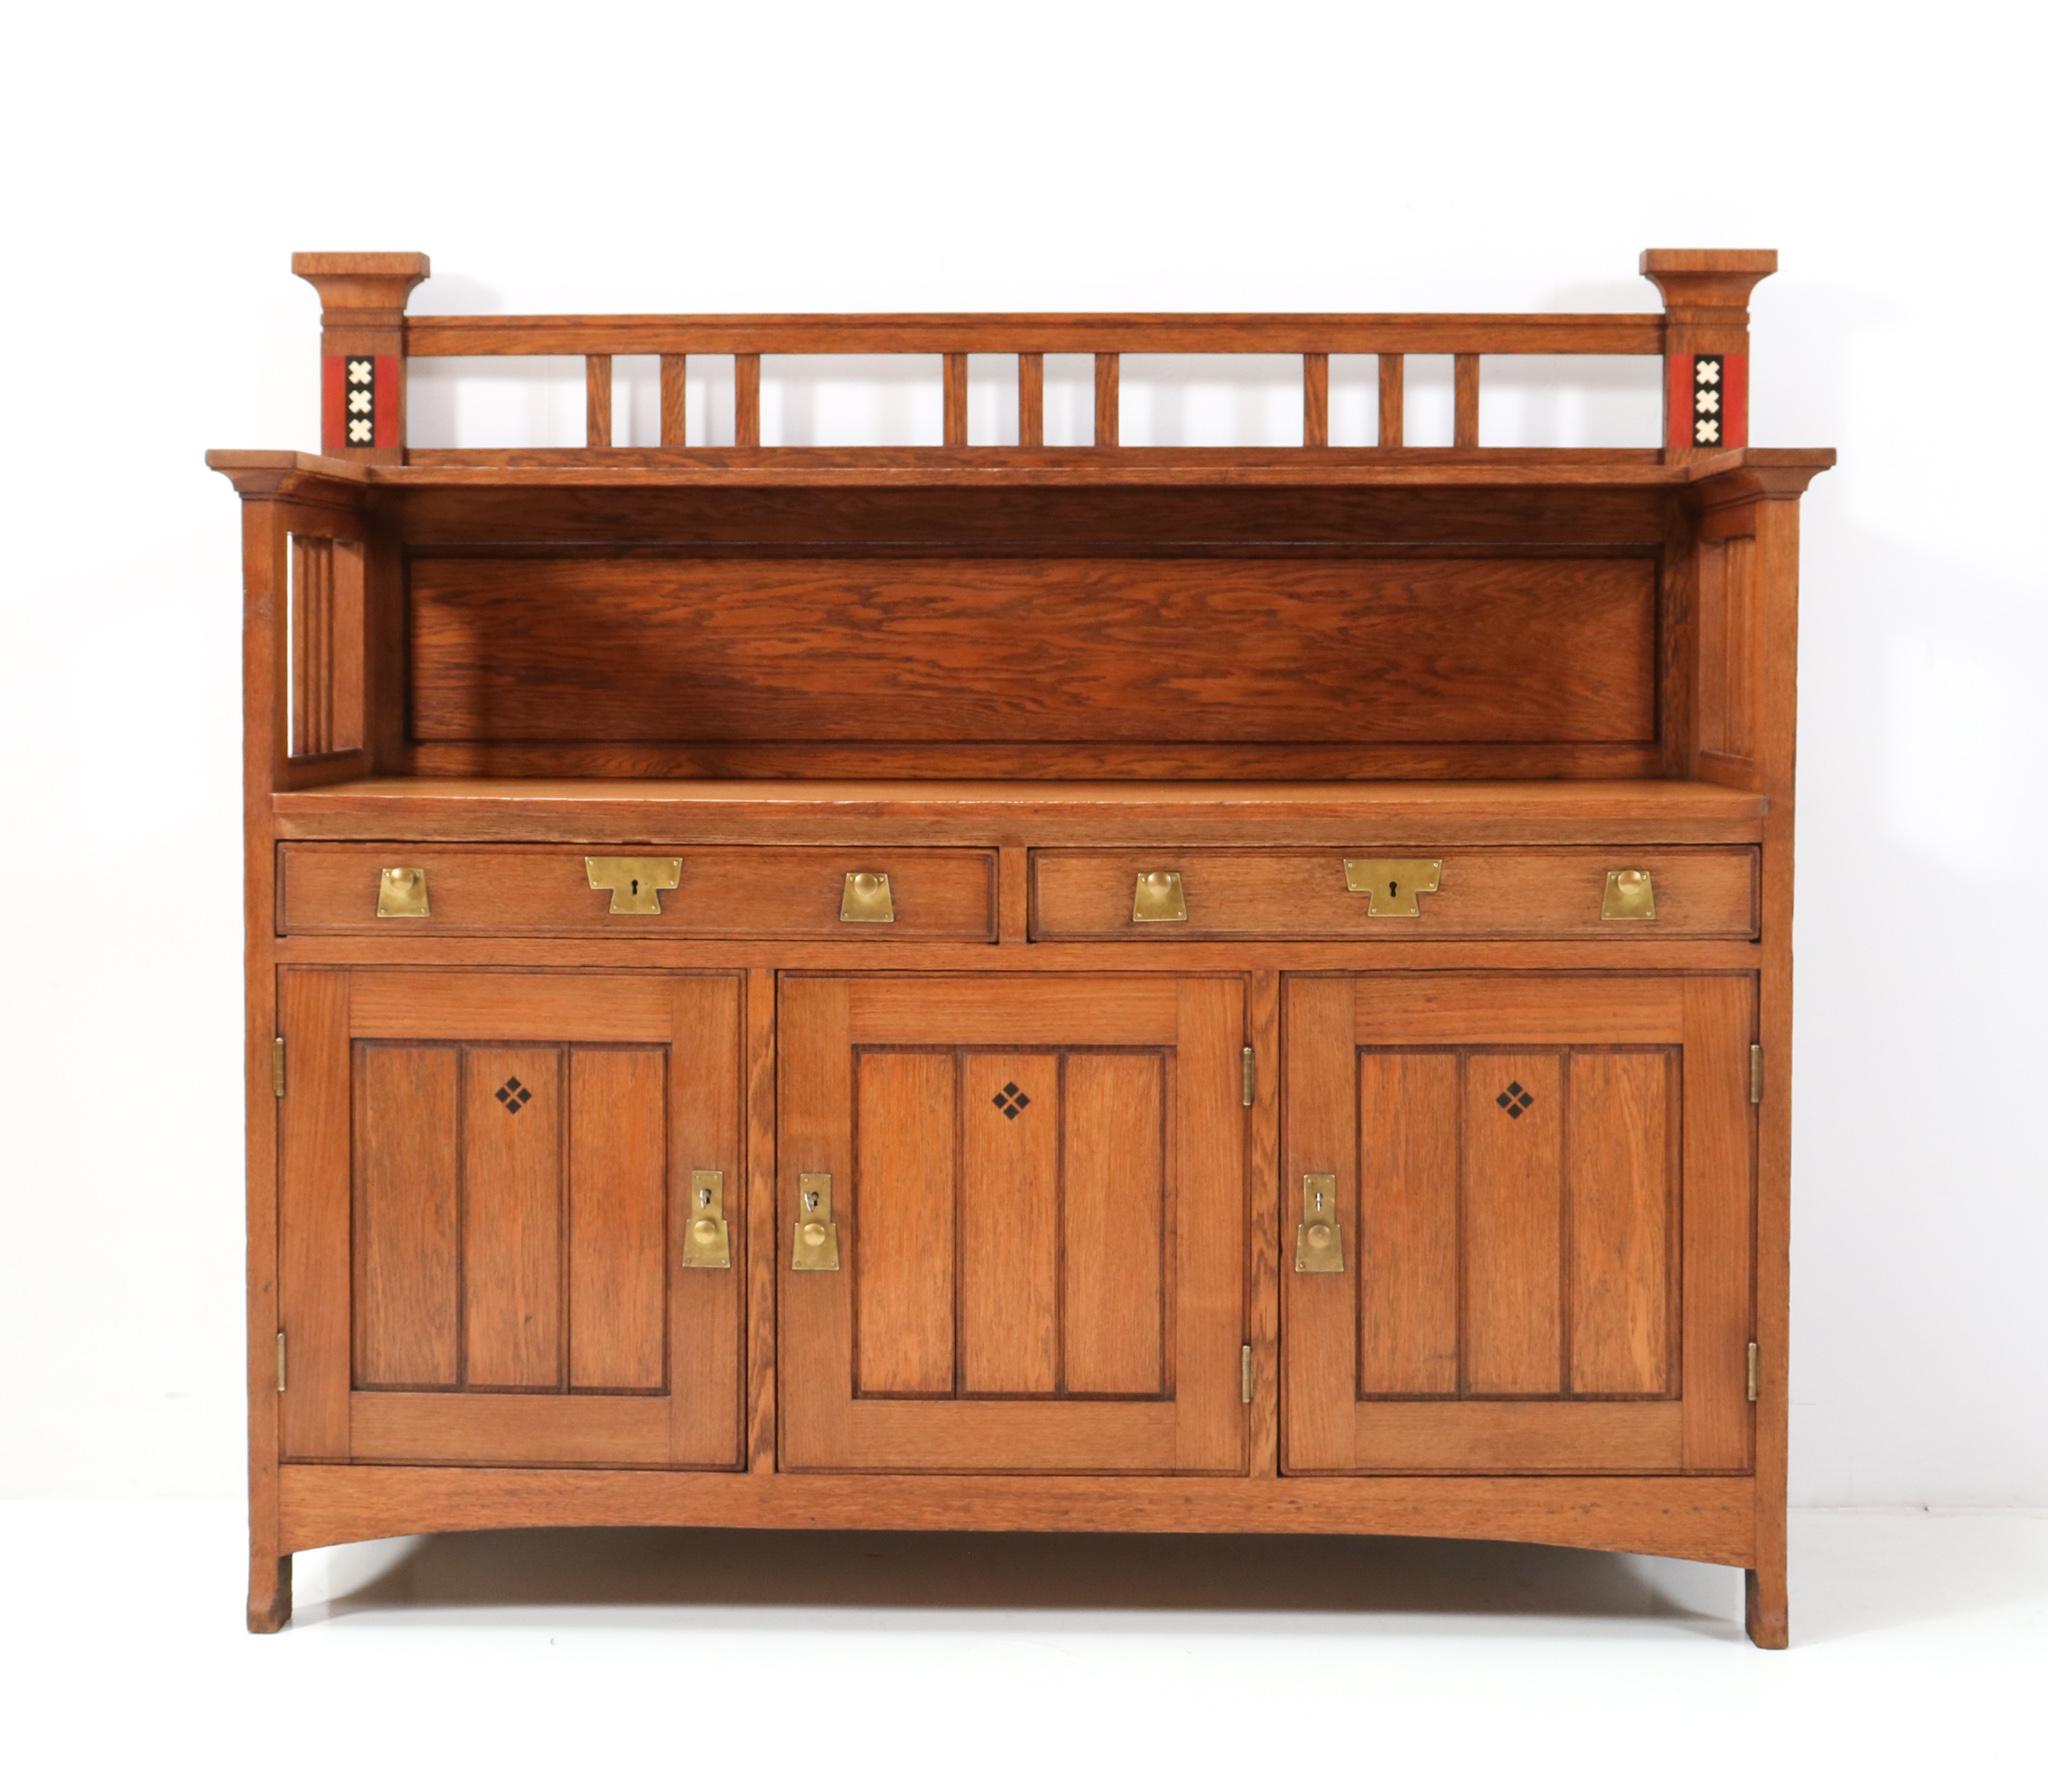 Magnificent and ultra rare buffet or cupboard.
The design is attributed to the well known Royal furniture company H.F. Jansen & Zonen from Amsterdam.
Solid oak with original brass knobs on doors and drawers.
Decorated with the coat of arms of the